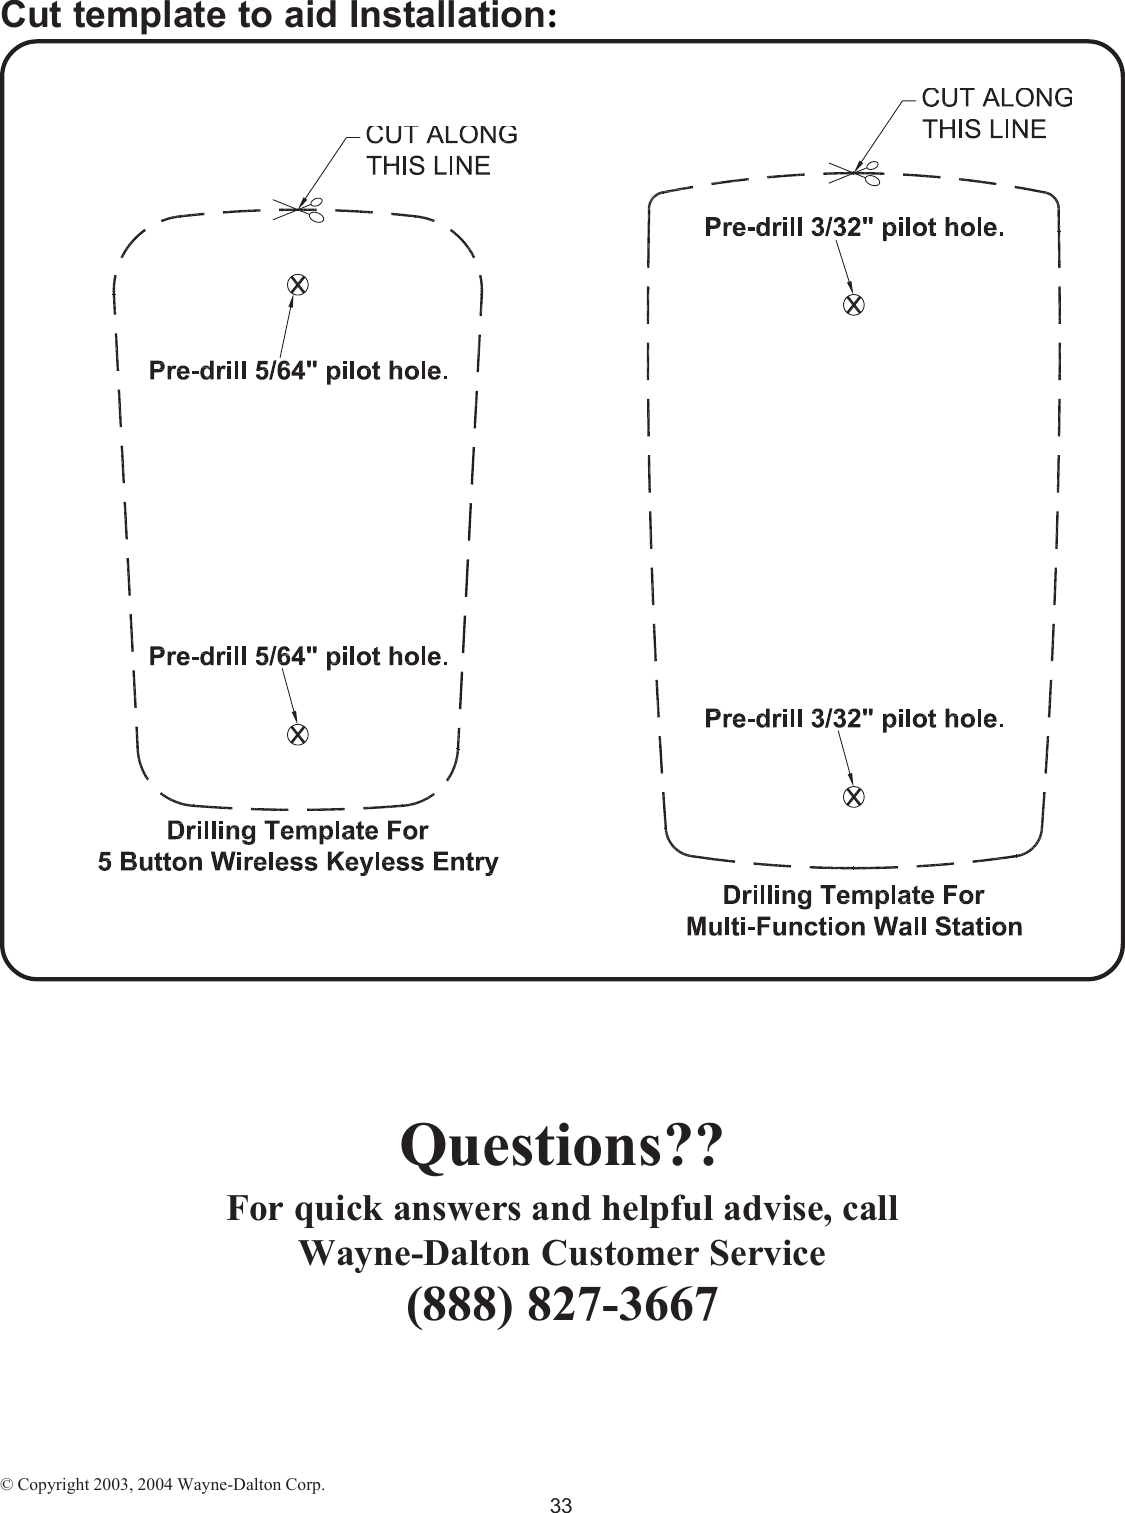 Cut template to aid Installation:Questions??For quick answers and helpful advise, callWayne-Dalton Customer Service(888) 827-3667© Copyright 2003, 2004 Wayne-Dalton Corp.33